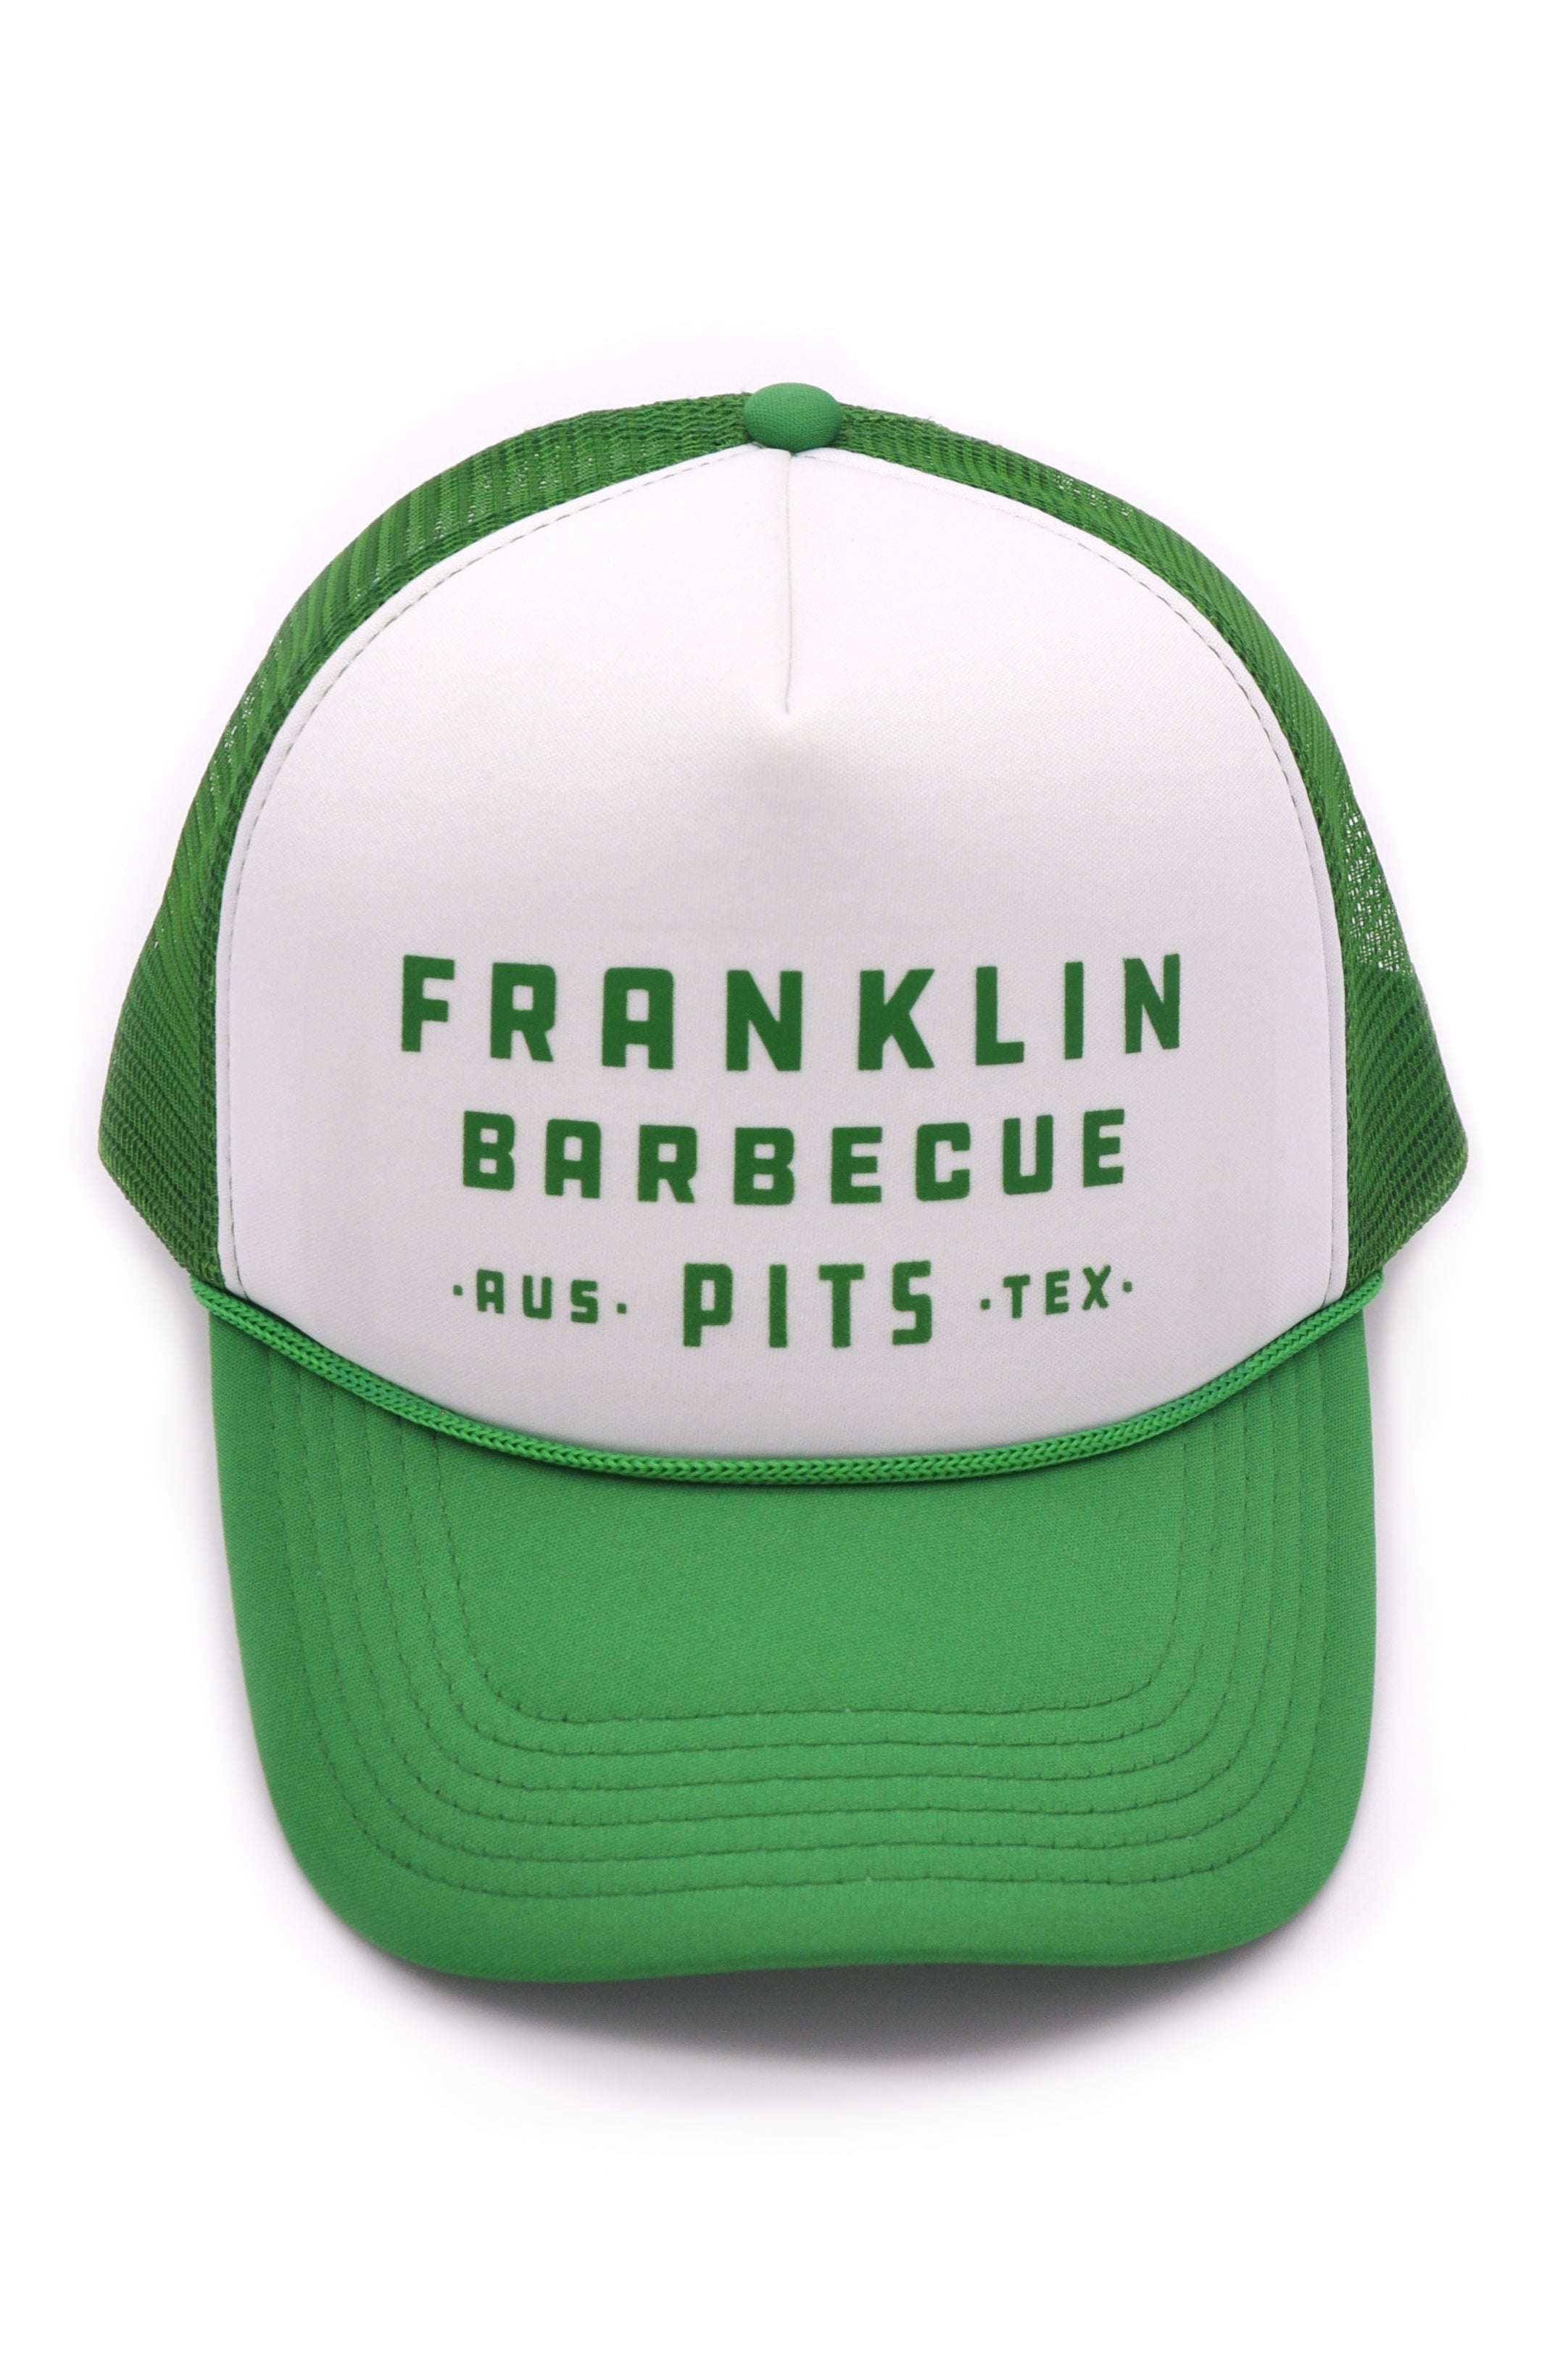 Franklin BBQ Pits Trucker Hat with green bill and mesh backing. Logo says "Franklin Barbecue Pits Aus Tex" in green lettering against a white background